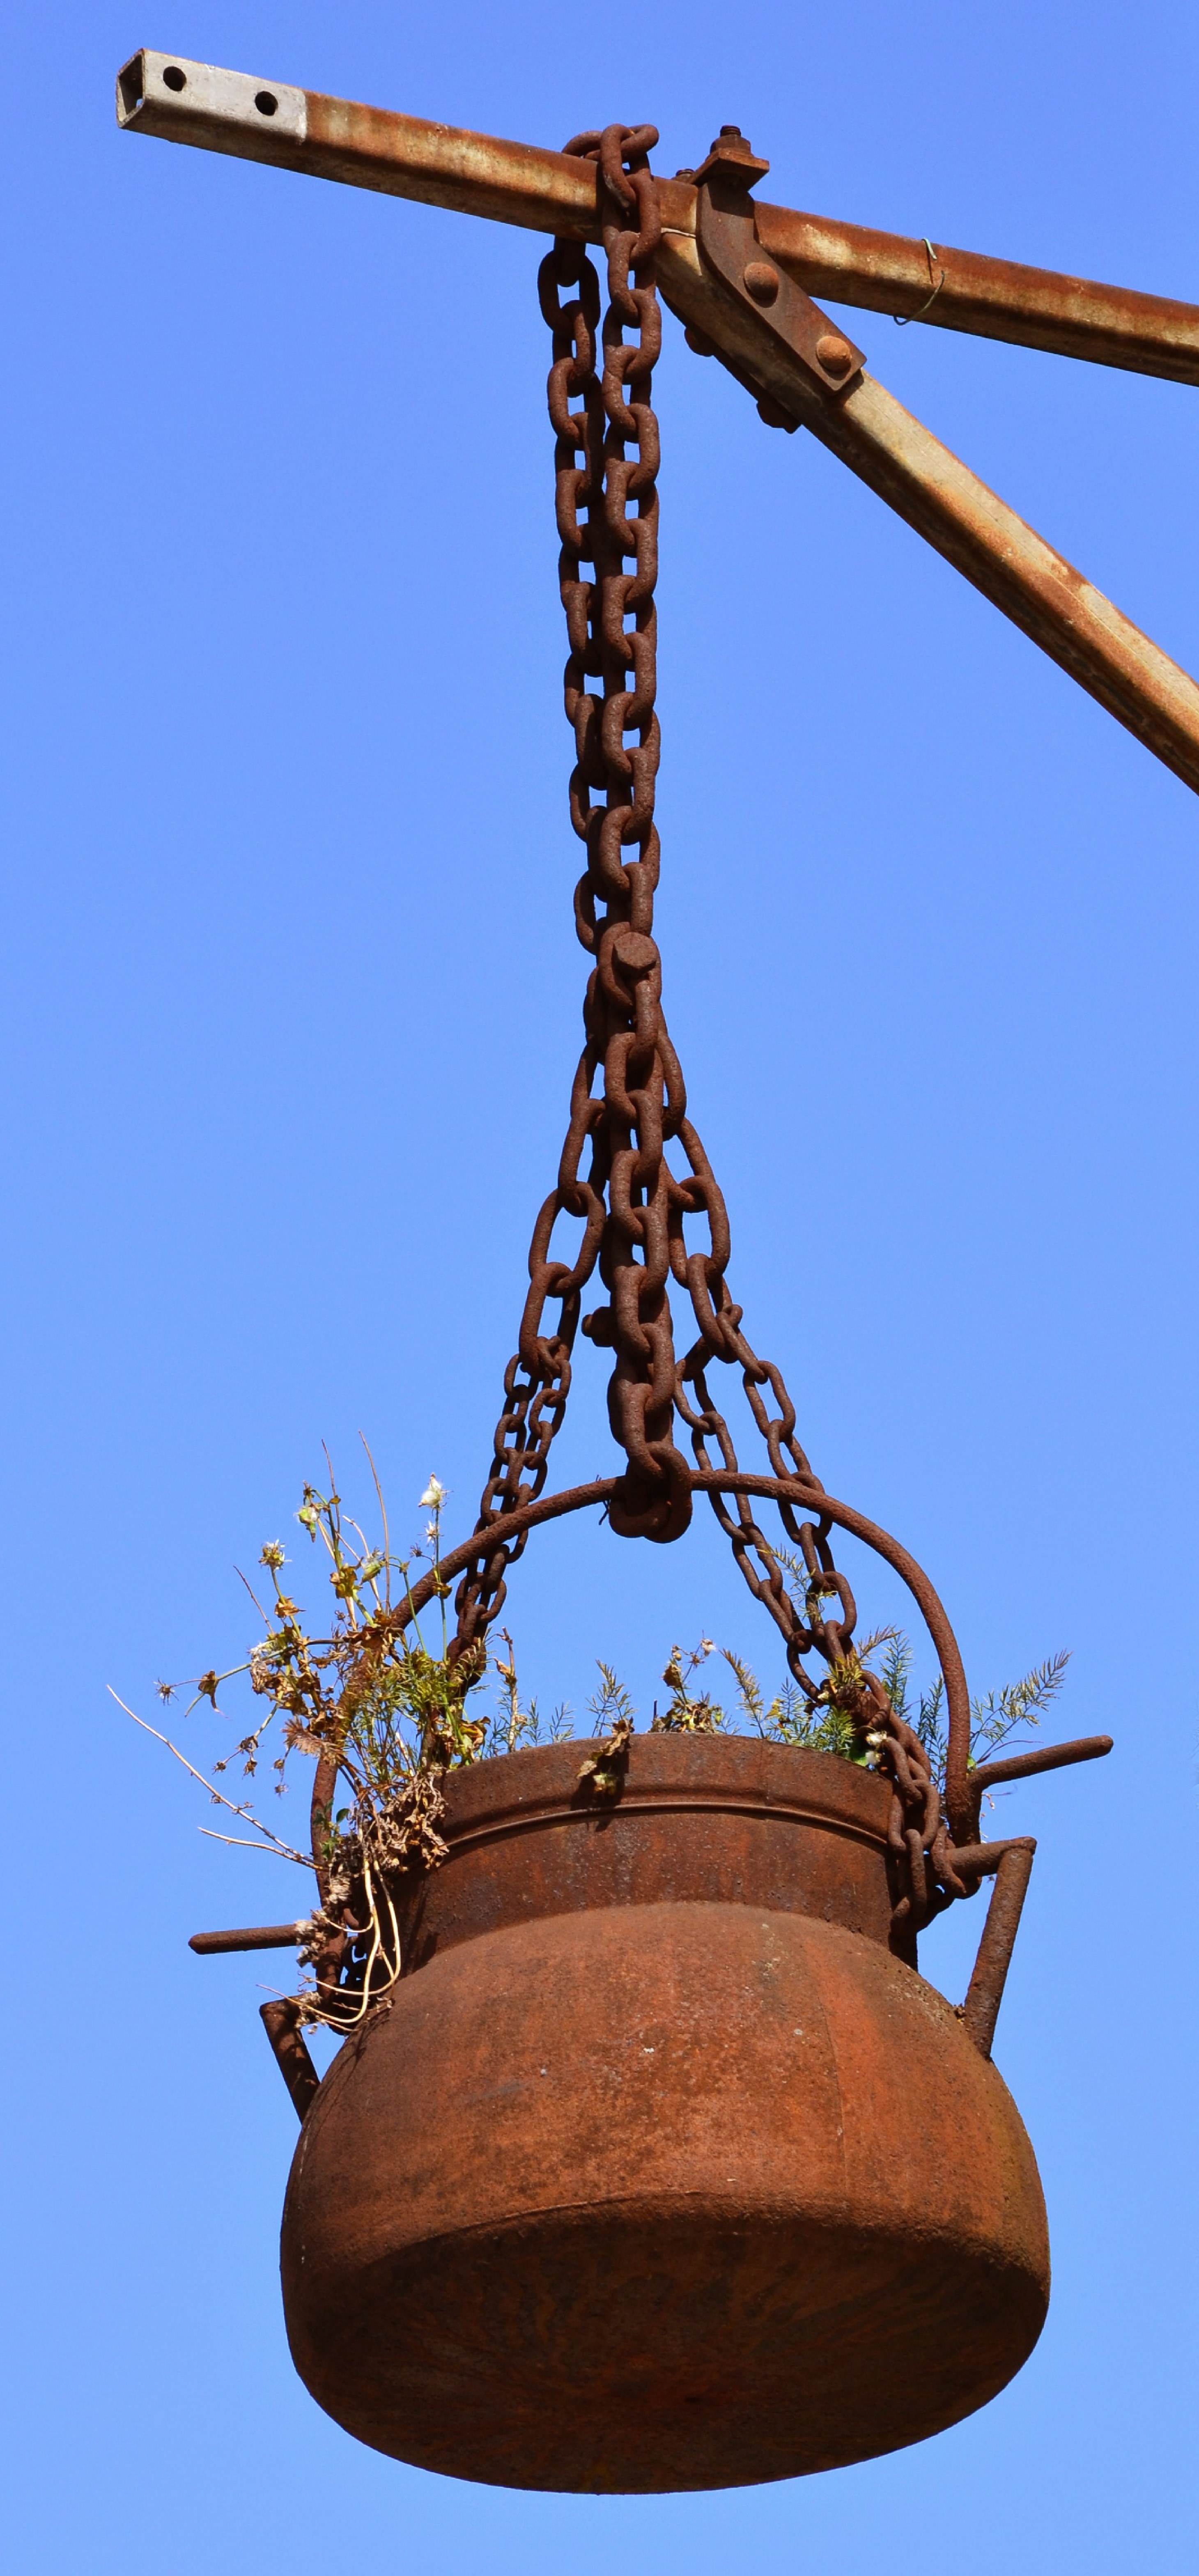 brown metal pot hanging on post with chains under blue sky during daytime